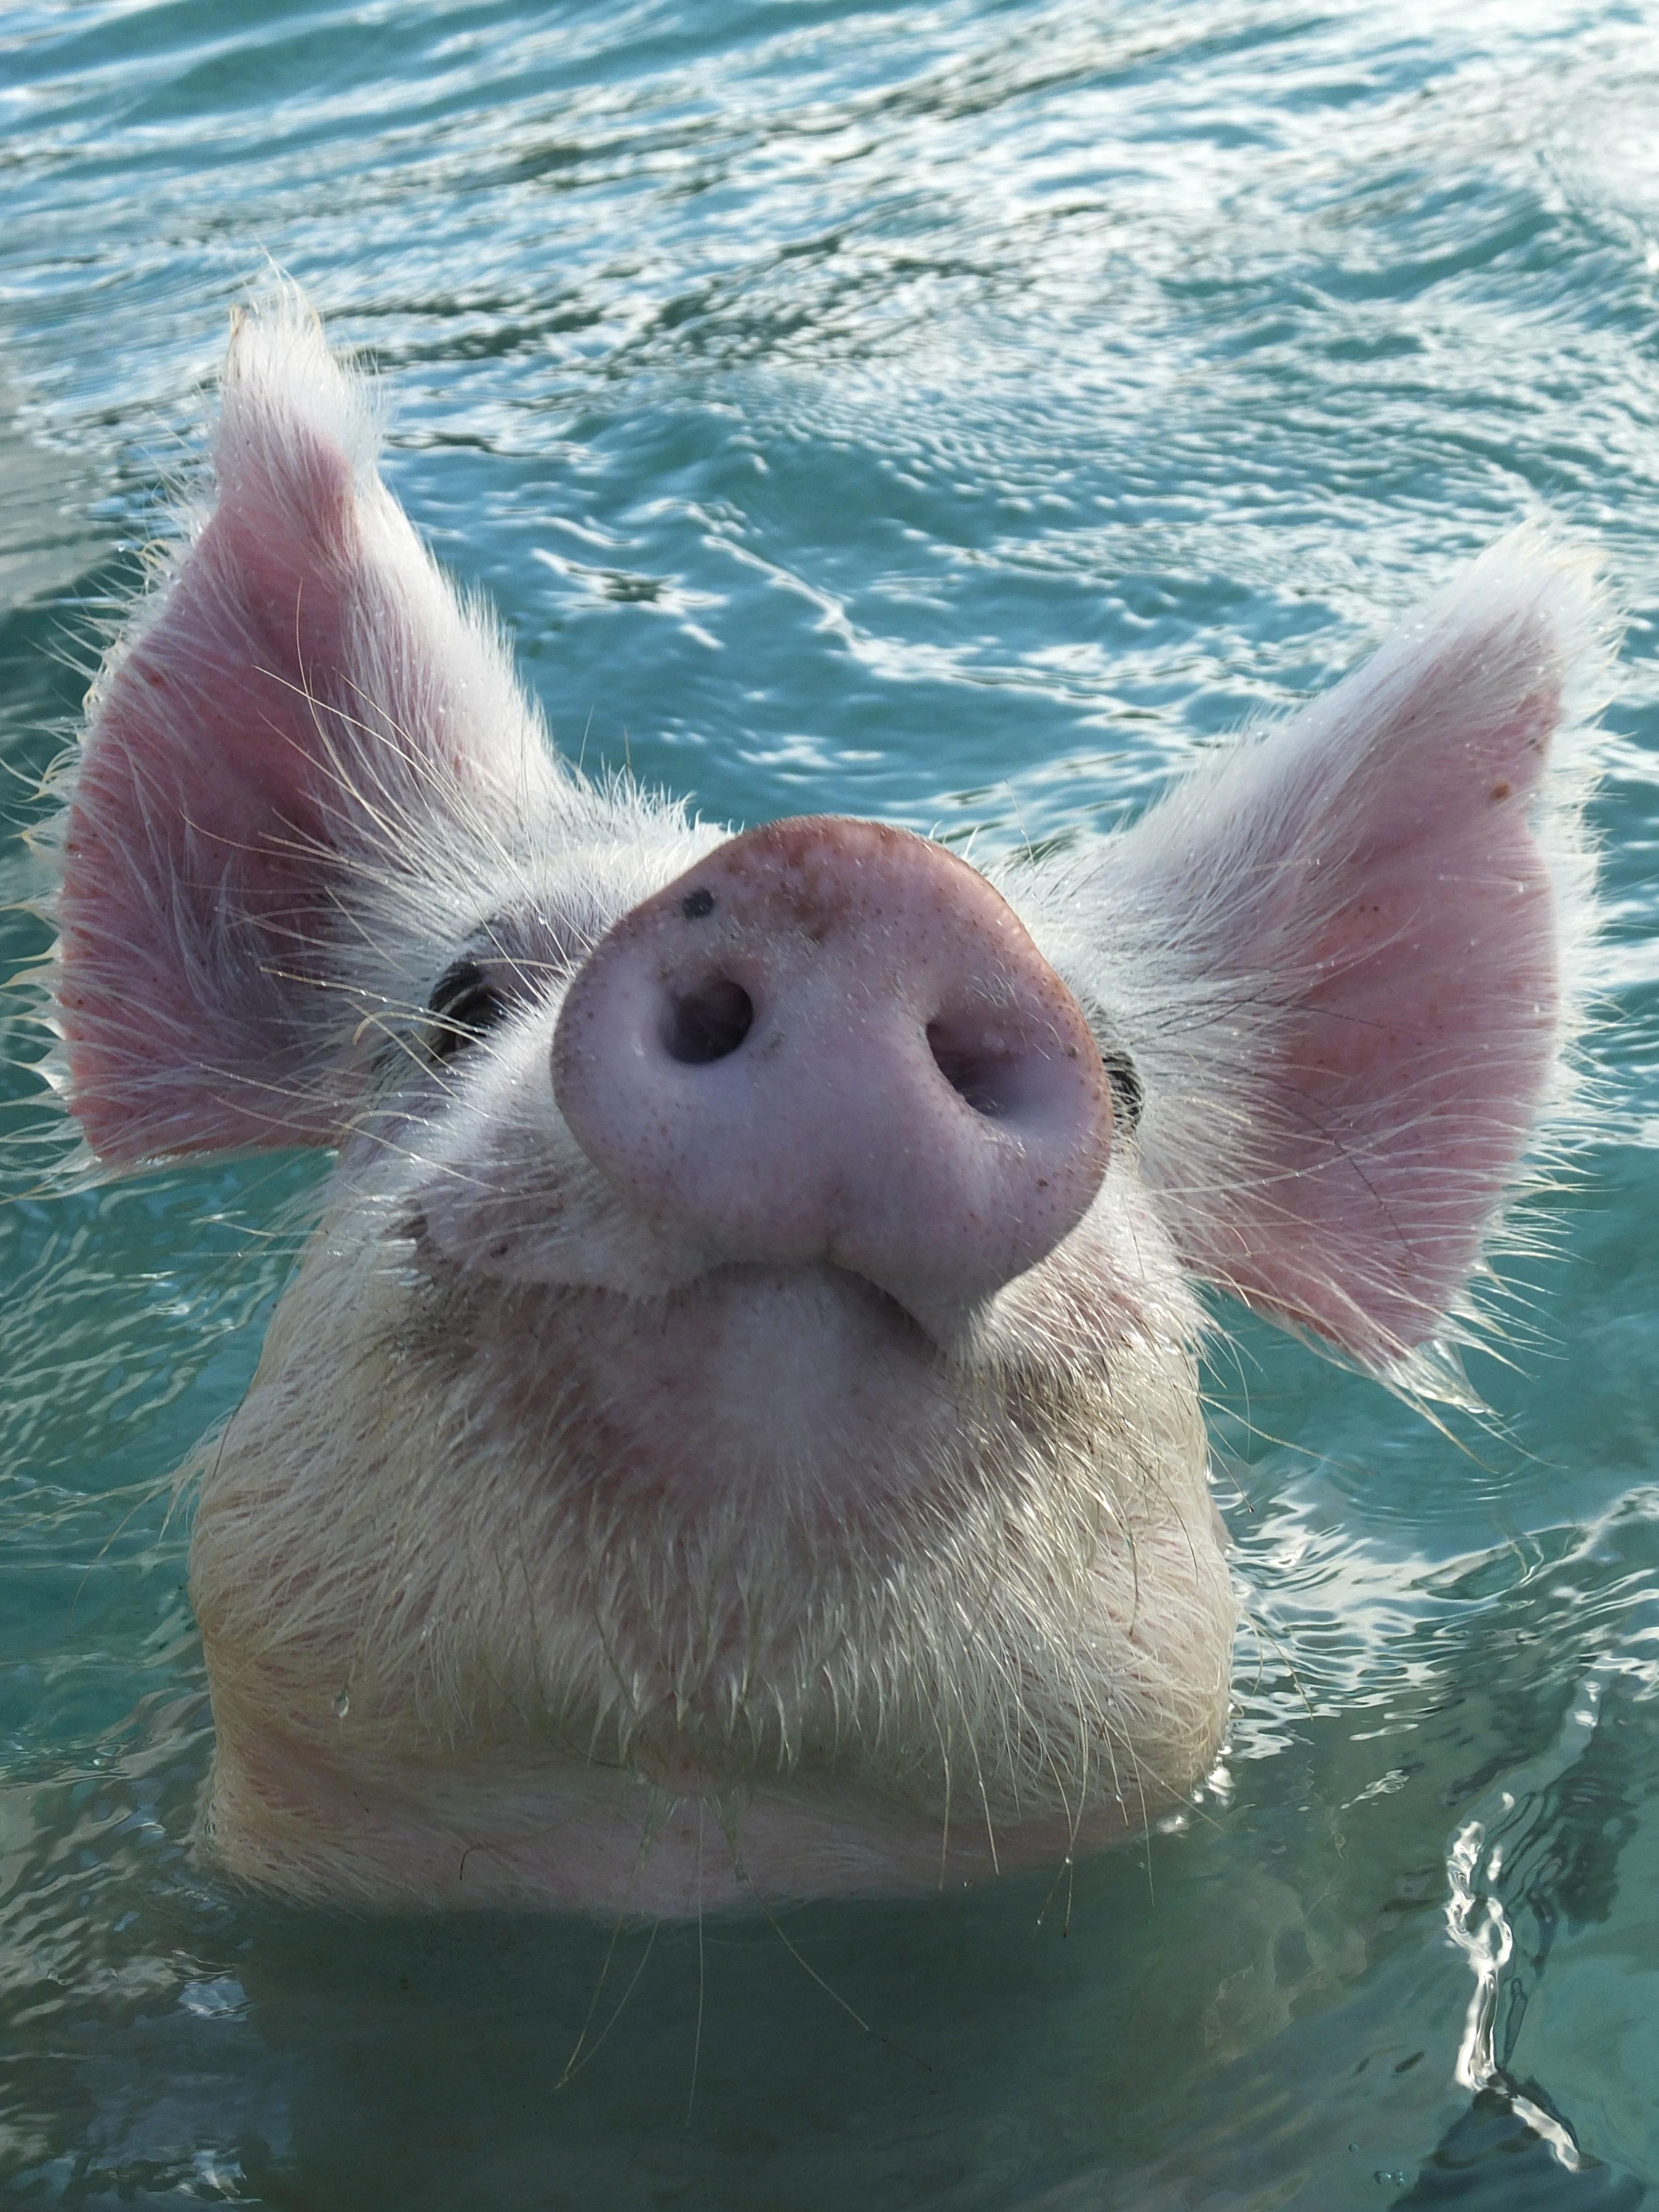 Pig Wallpaper HD Pigs In The Bahamas Wallpaper High Quality